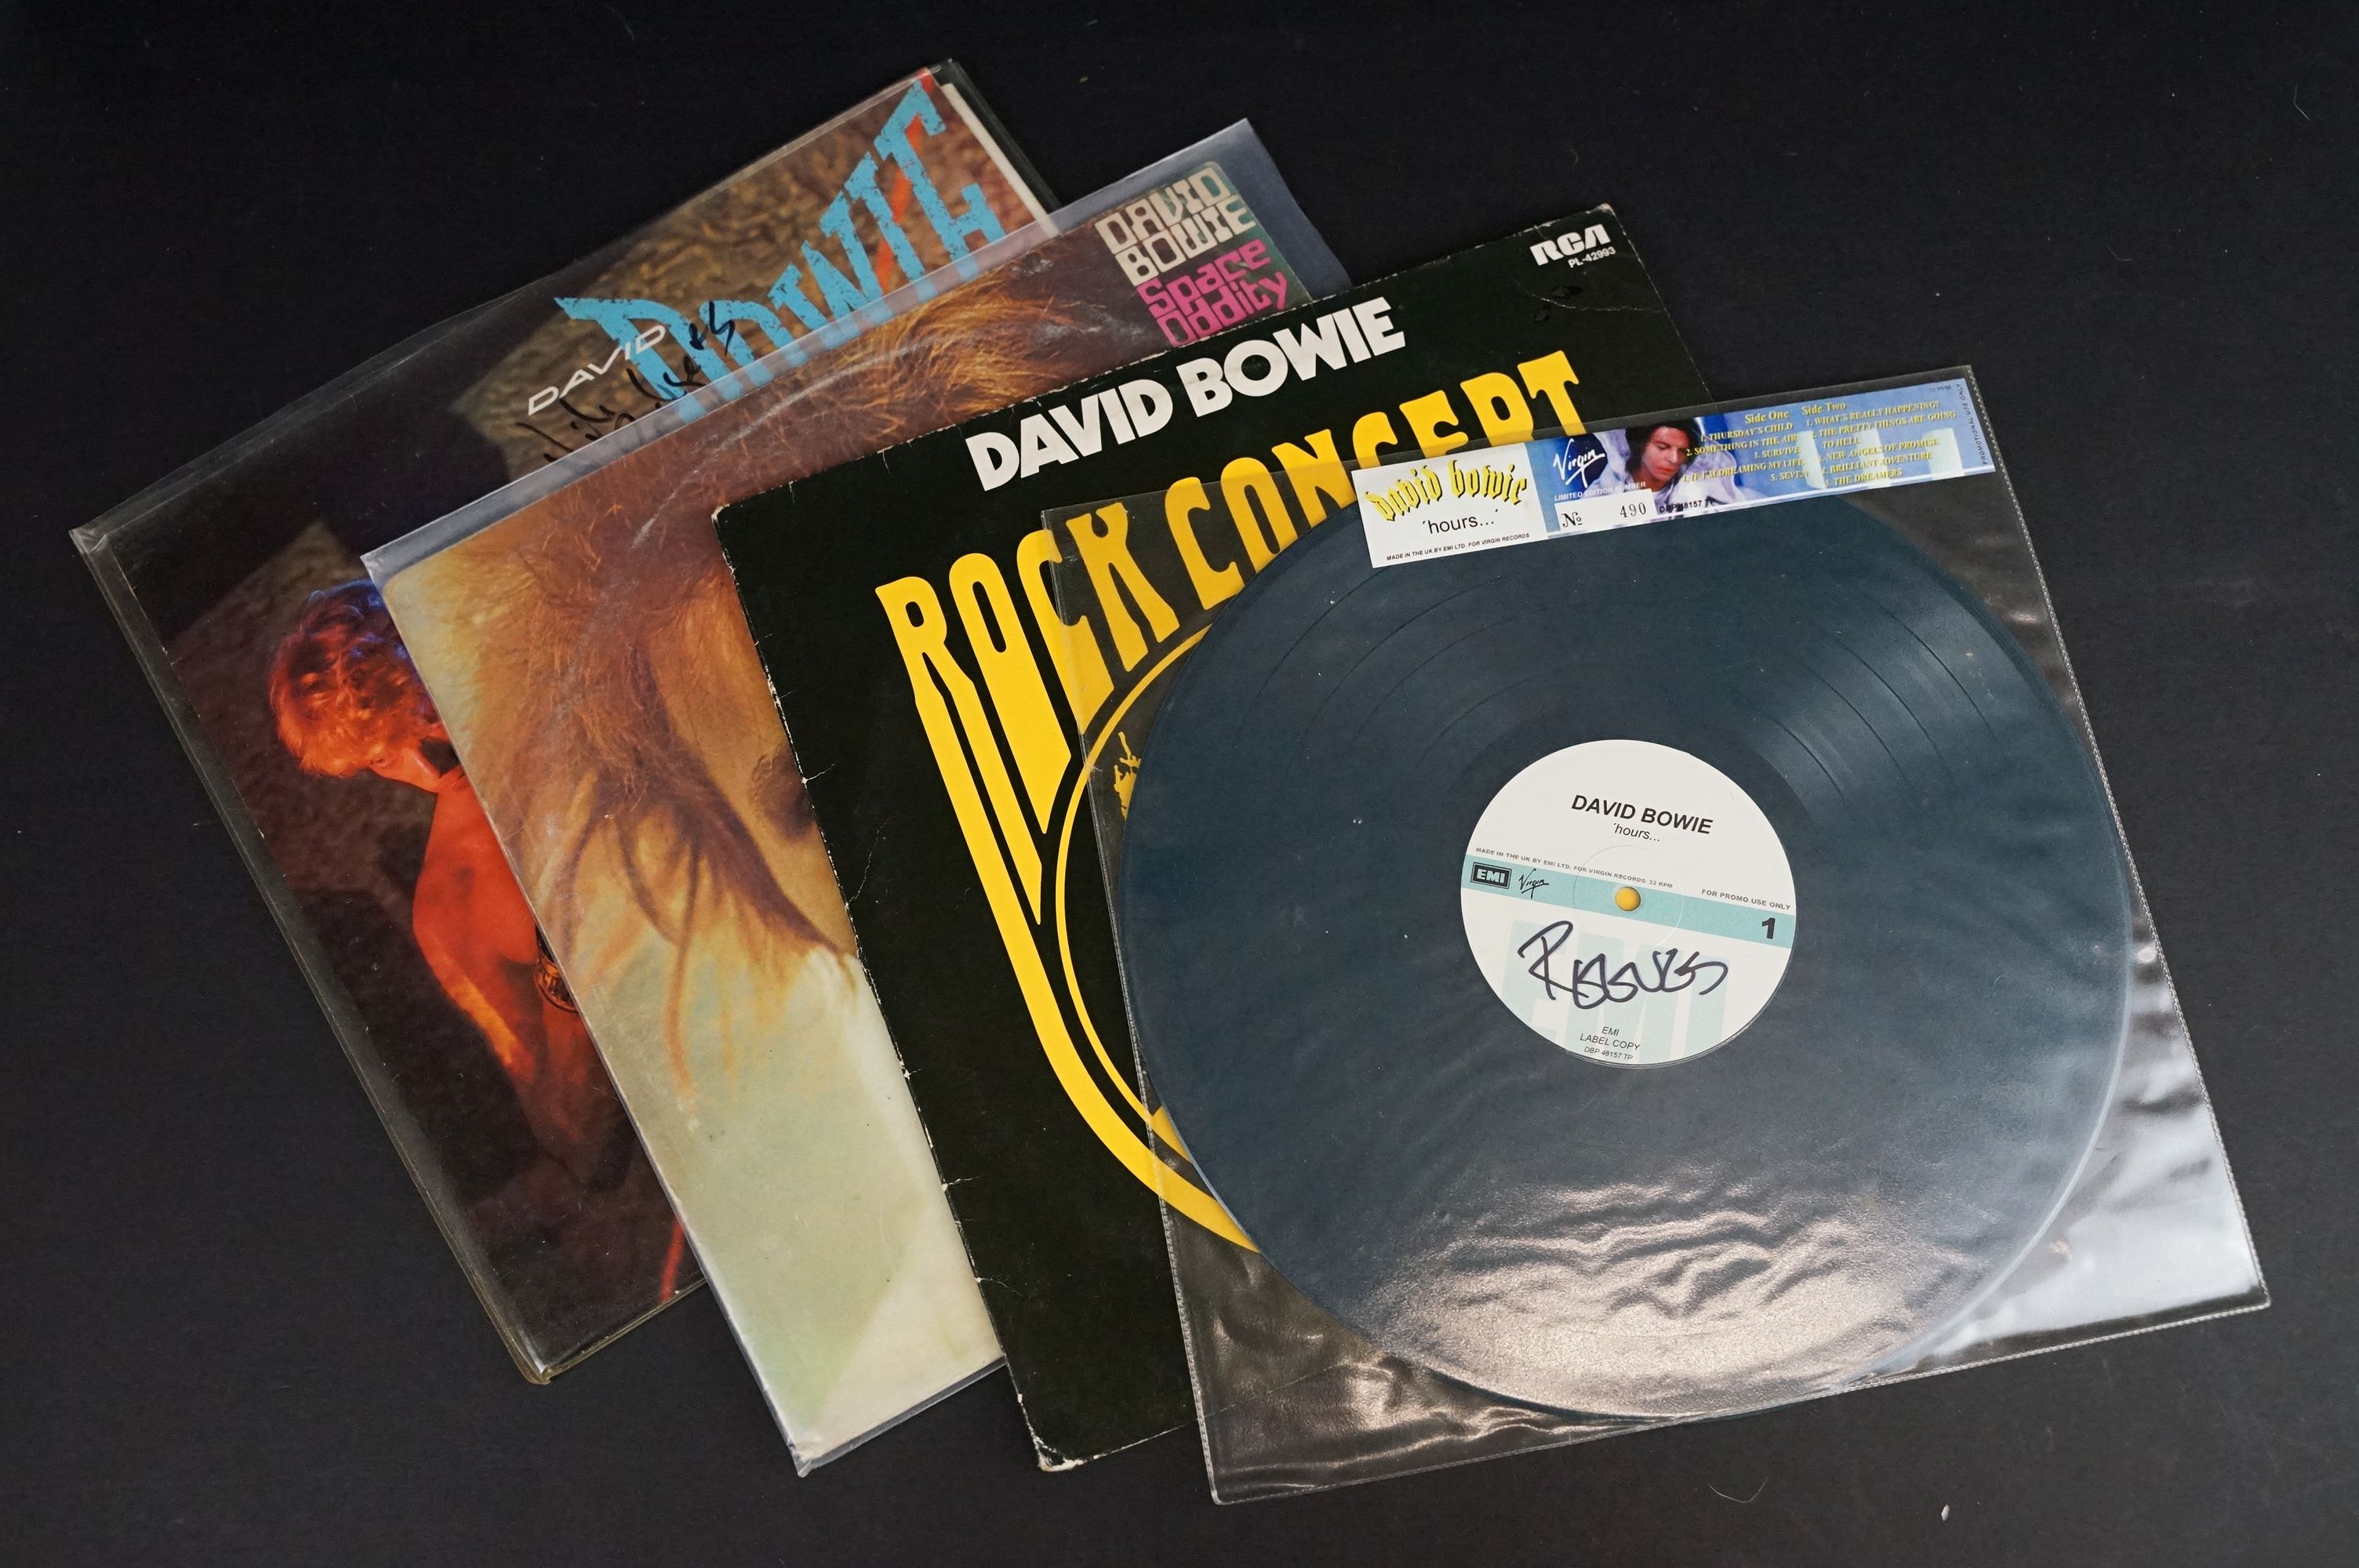 Vinyl / Autographs - 15 David Bowie and related albums signed by members of David Bowie’s band and - Image 6 of 8